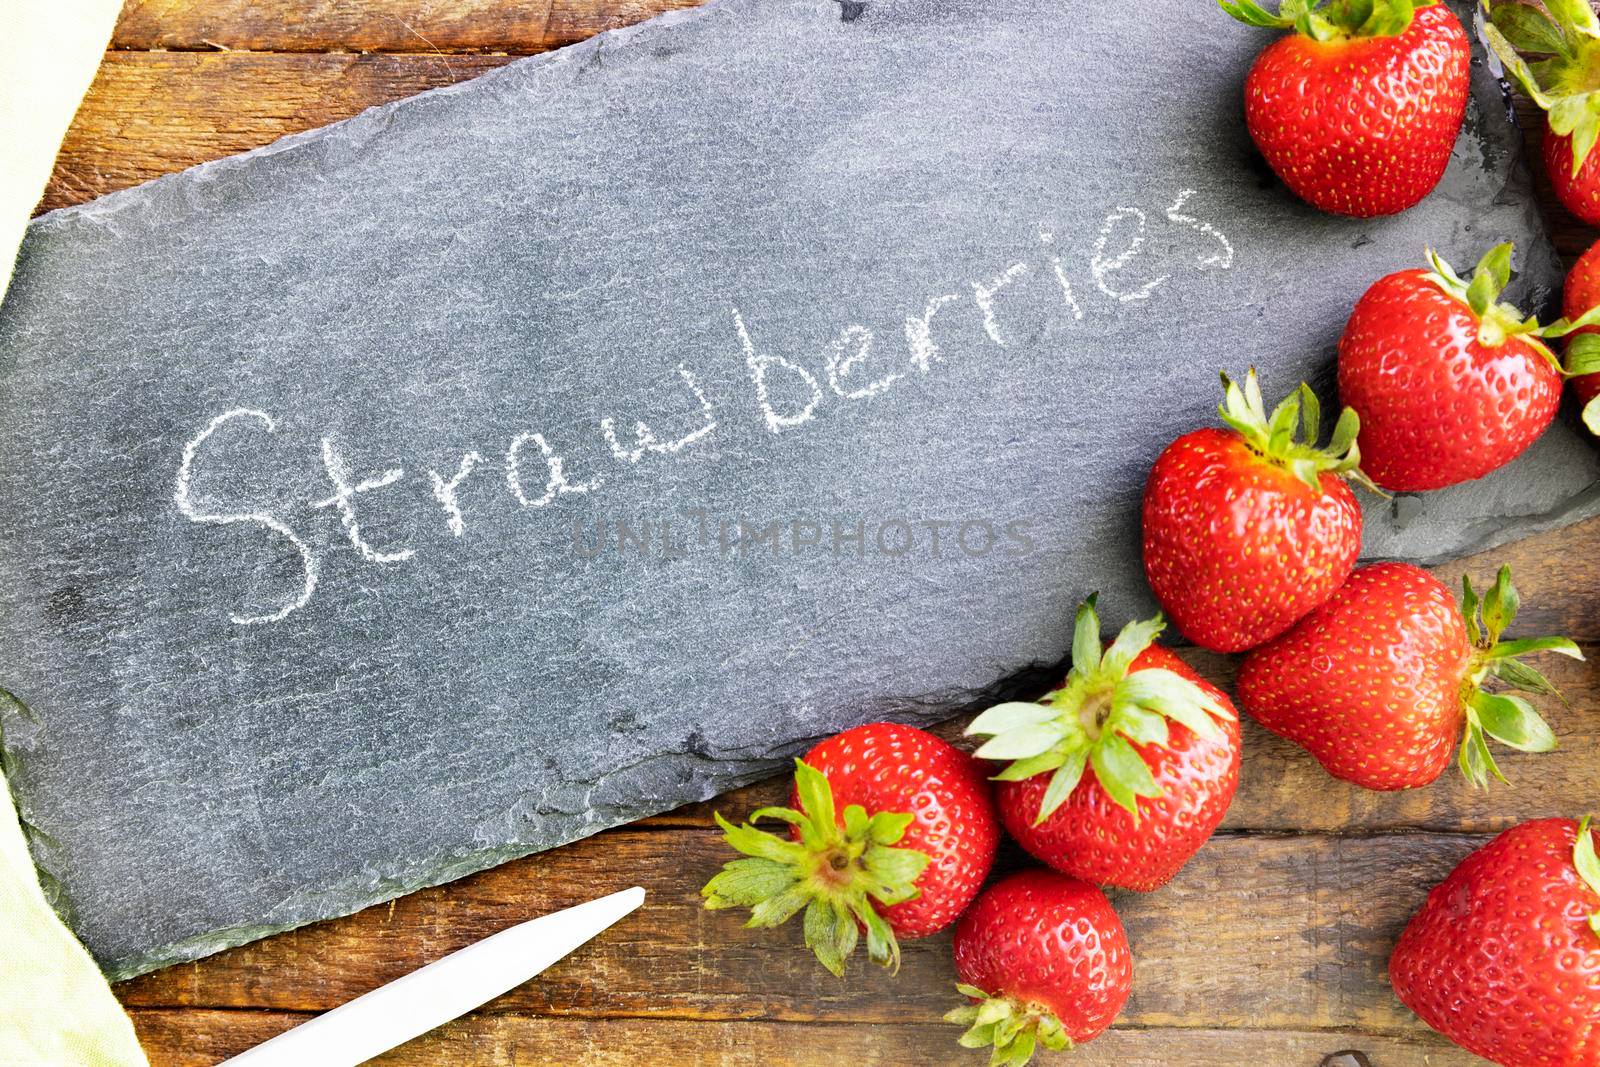 Chalkboard Sign and Strawberries by charlotteLake